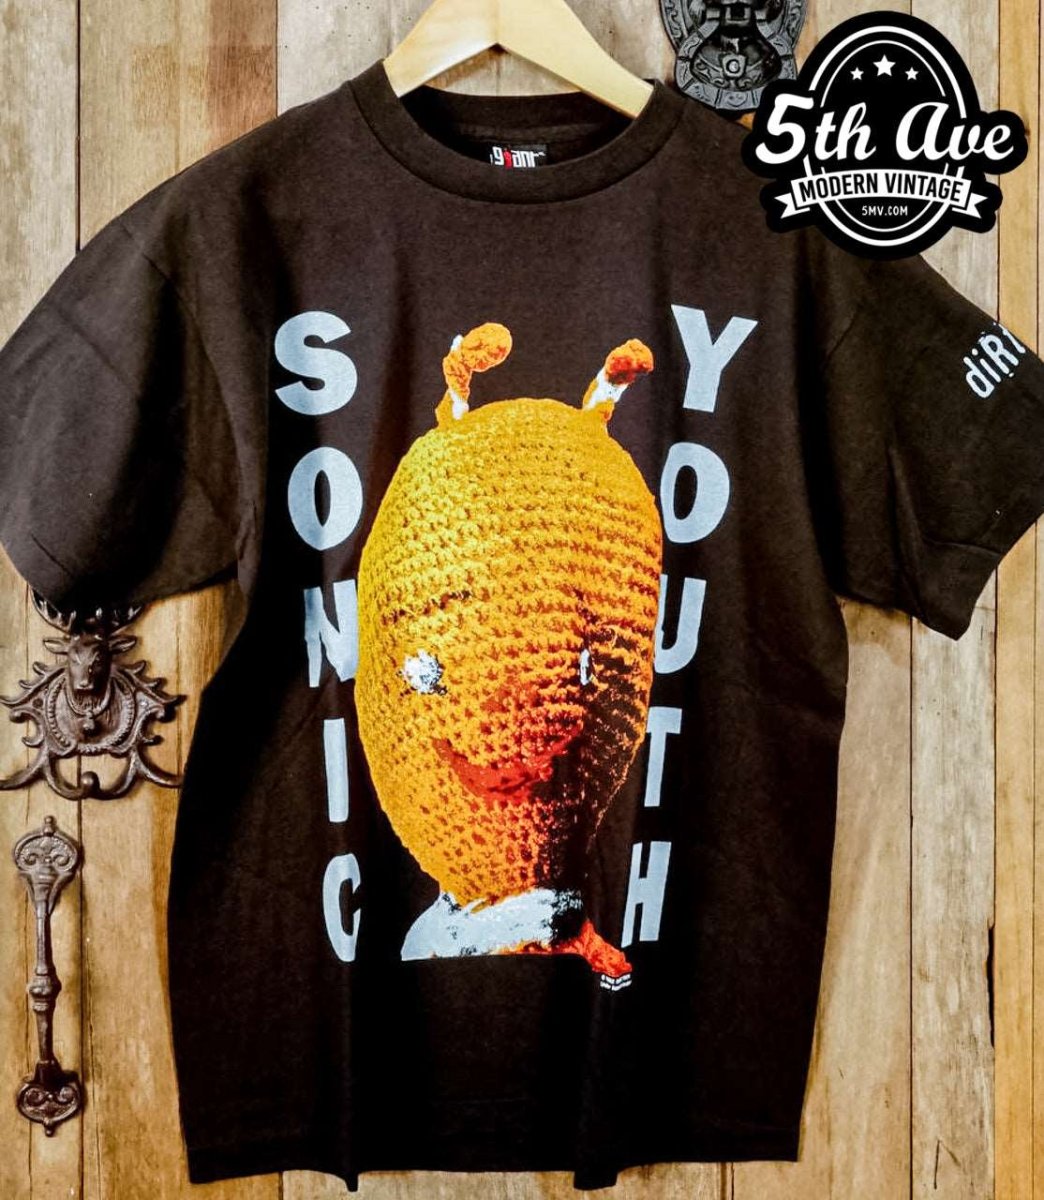 Sonic Youth - New Vintage Band T shirt - Vintage Band Shirts